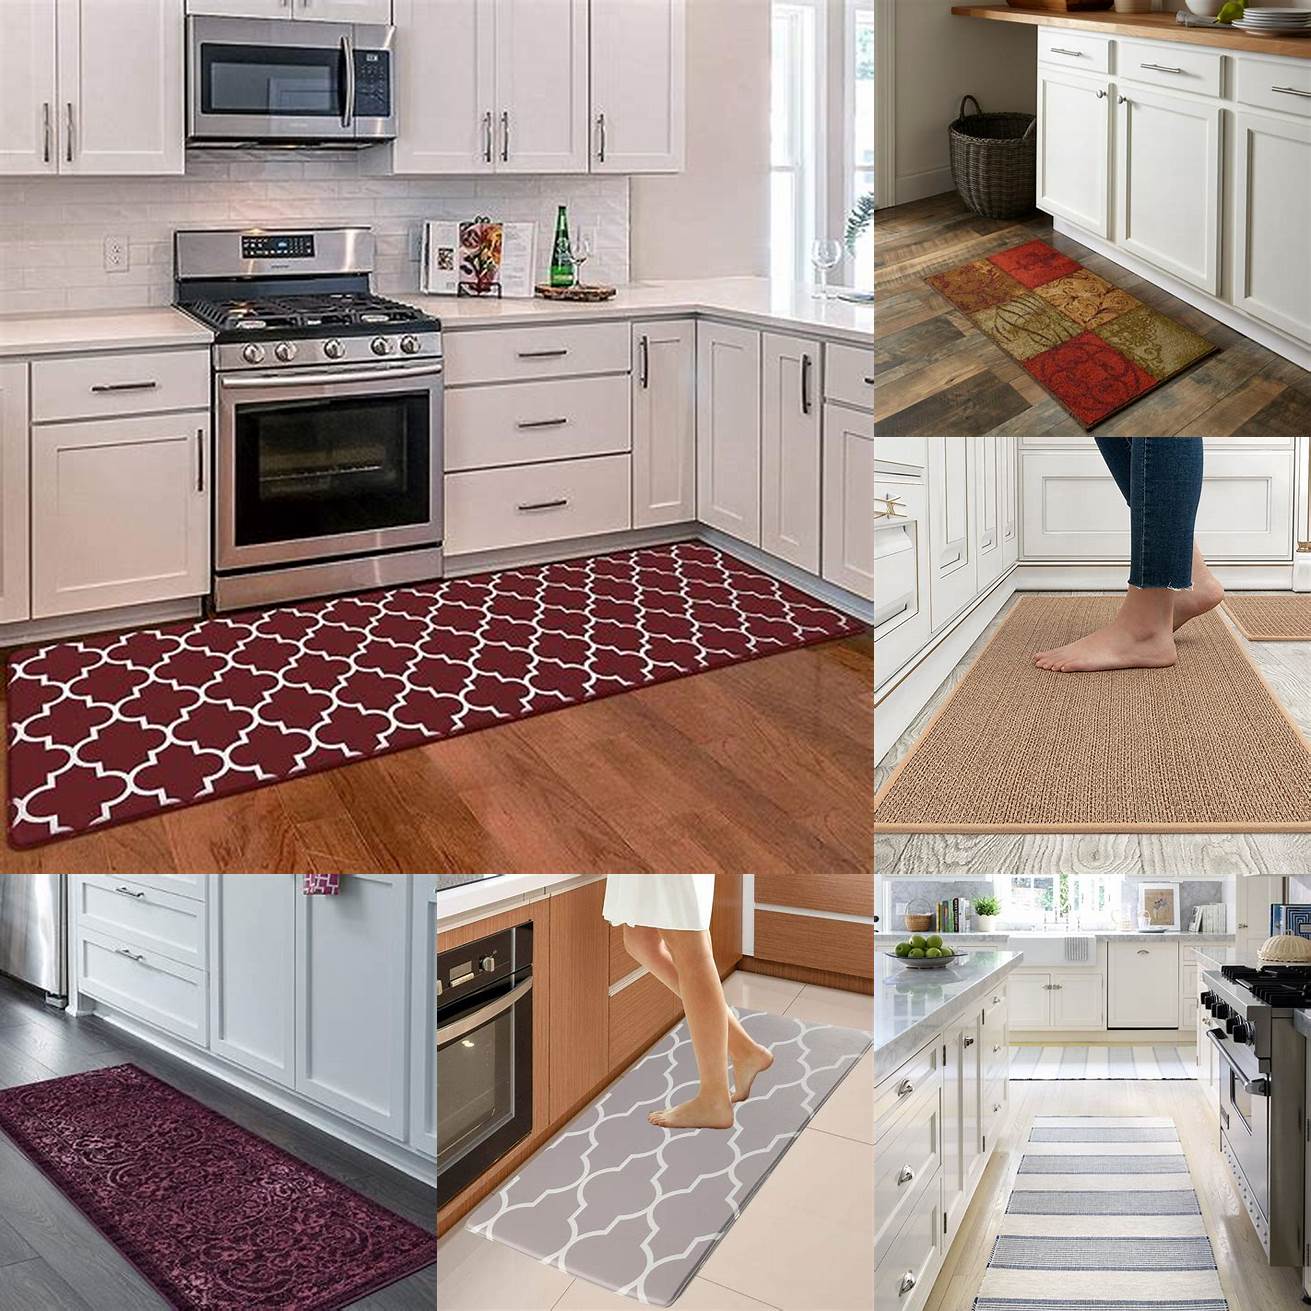 Comfort Kitchen area rugs provide a comfortable surface to stand on while cooking or doing dishes